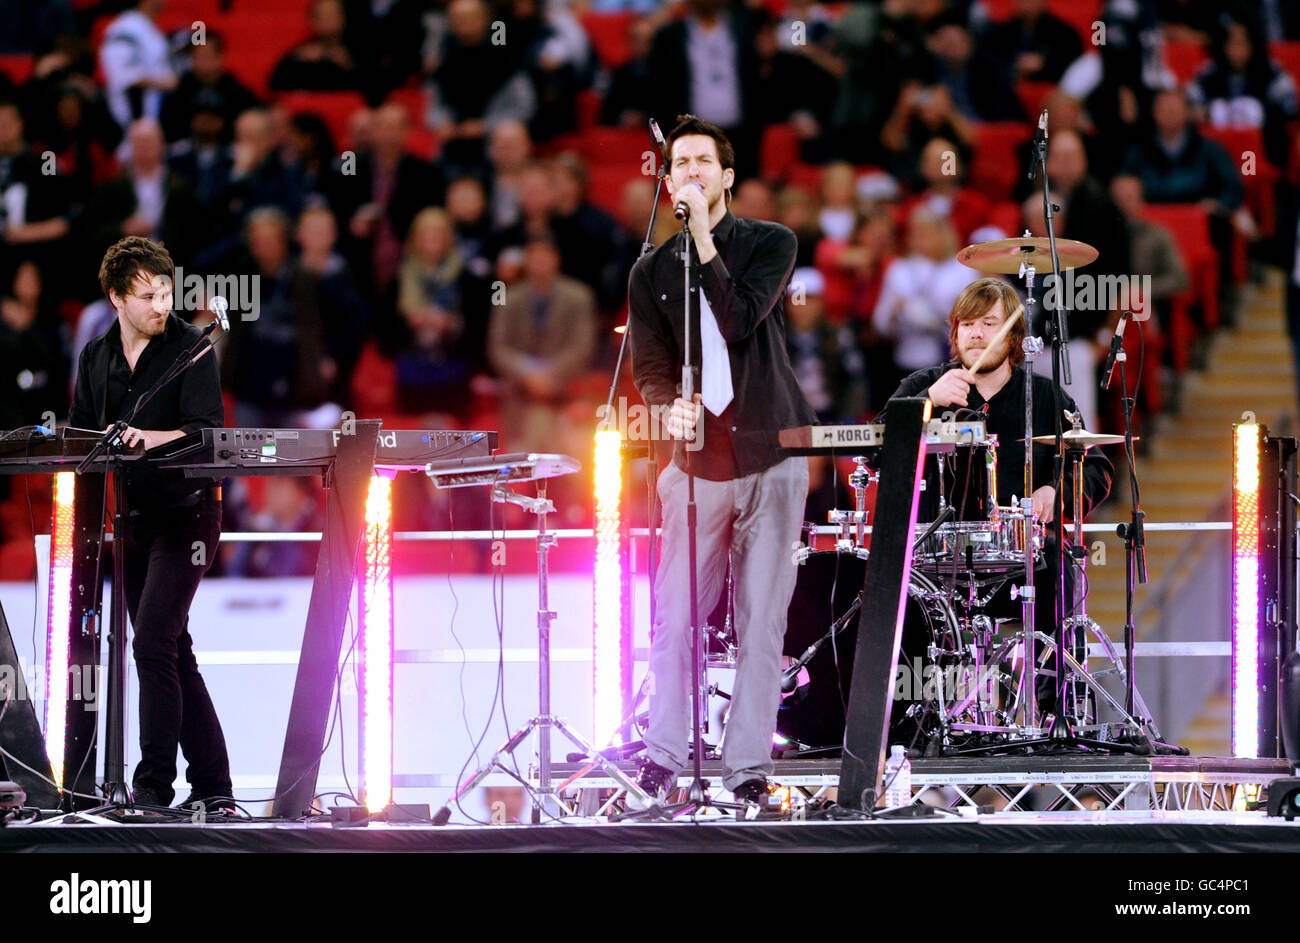 American Football - NFL - New England Patriots v Tampa Bay Buccaneers - Wembley Stadium. Calvin Harris performs before the game Stock Photo